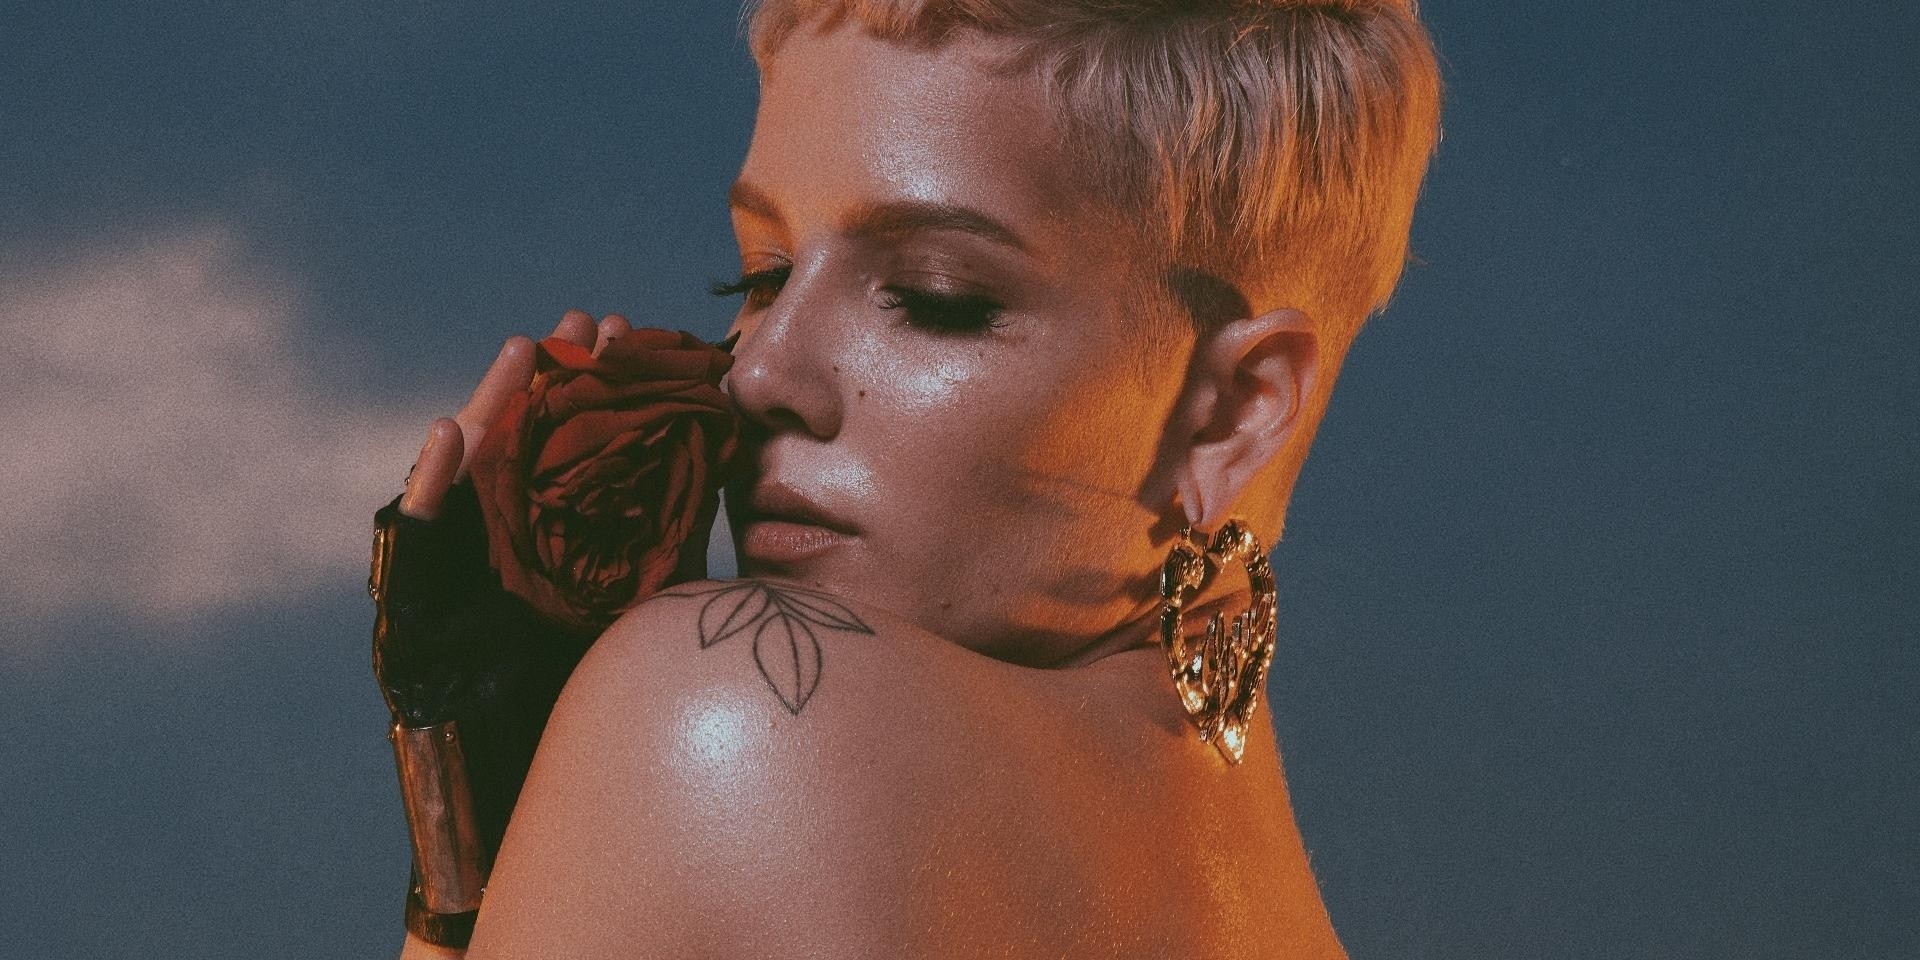 Halsey releases new emotionally charged single 'Without Me'